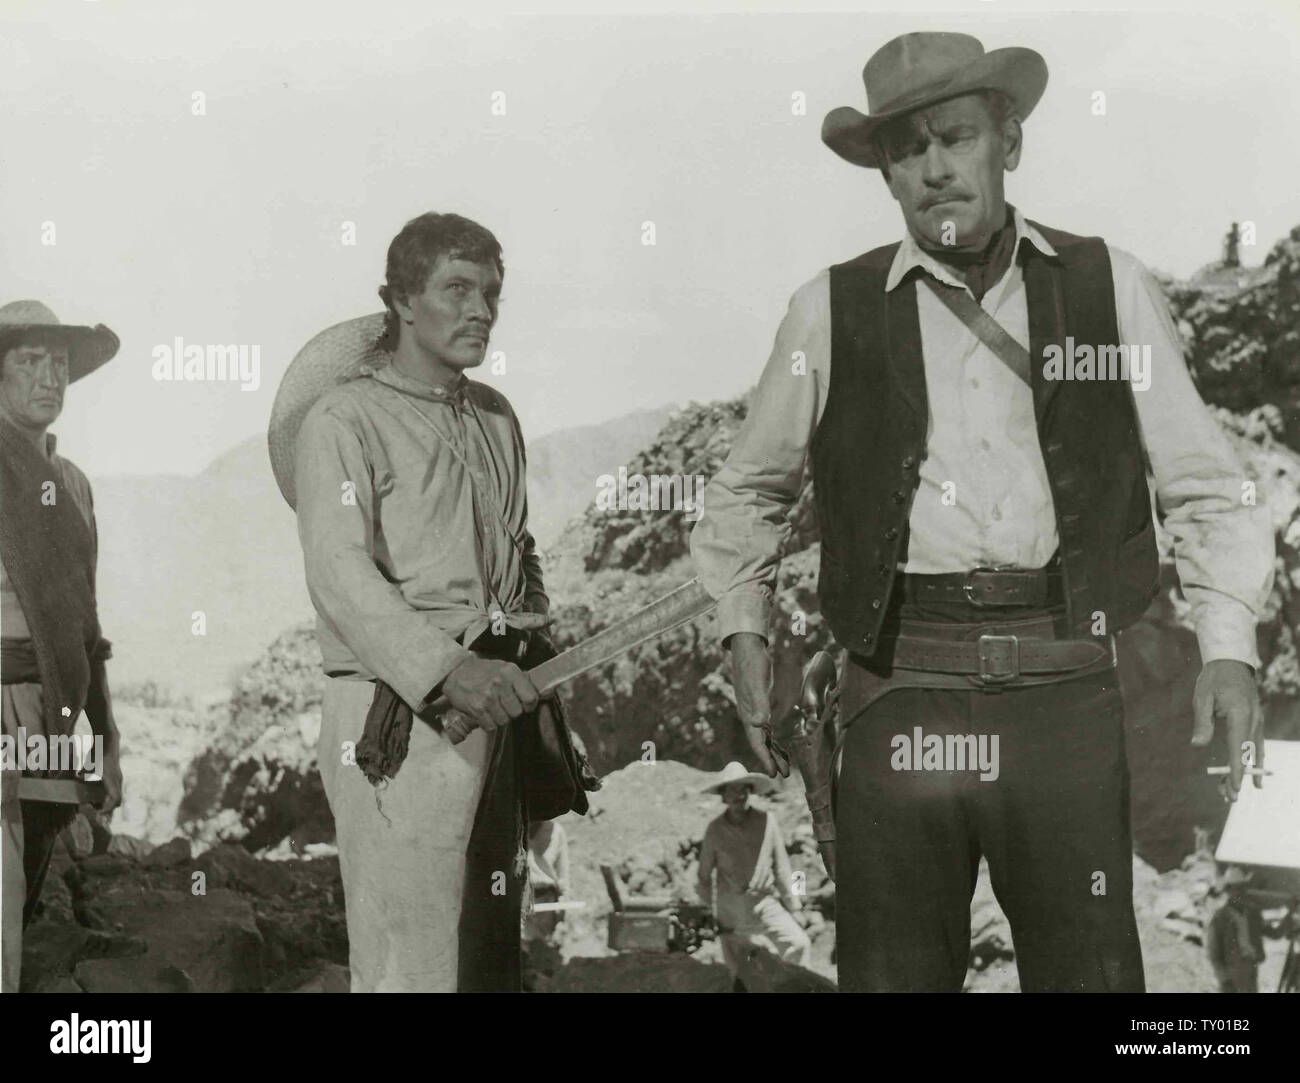 Los Angeles.CA.USA.   William Holden      in ©Warner Bros film,  The Wild Bunch (1969).    Director: Sam Peckinpah Screenplay: Walon Green and Sam Peckinpah Source: 1900s Mexican revolution, closing of the frontier Ref:LMK106-SLIB031218-001 Supplied by LMKMEDIA. Editorial Only. Landmark Media is not the copyright owner of these Film or TV stills but provides a service only for recognised Media outlets. pictures@lmkmedia.com Stock Photo